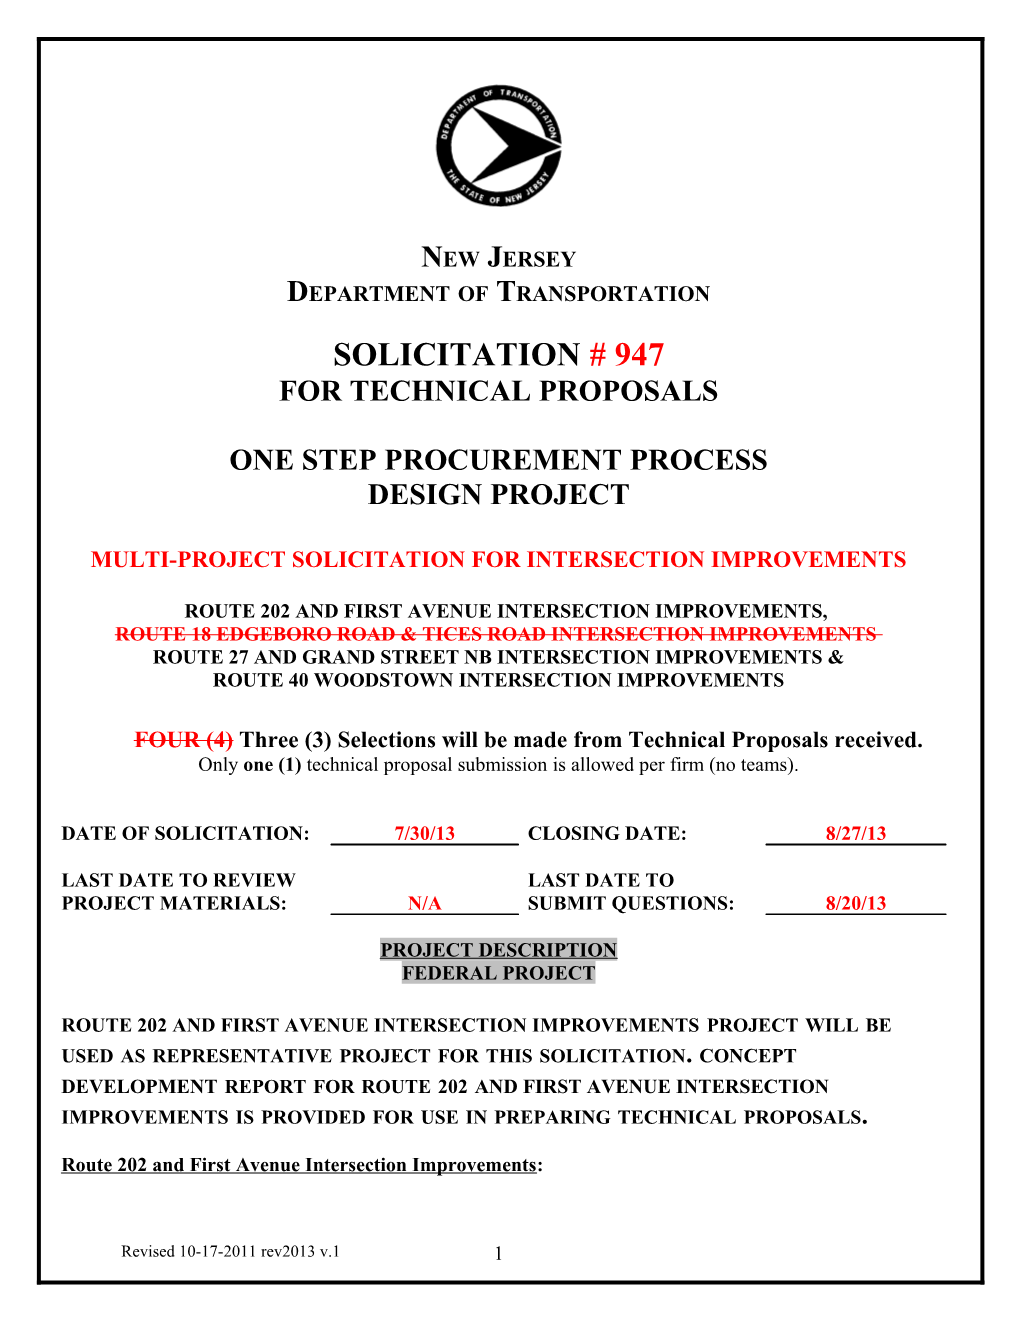 Solicitation for Federal Project 1 Step Project Management